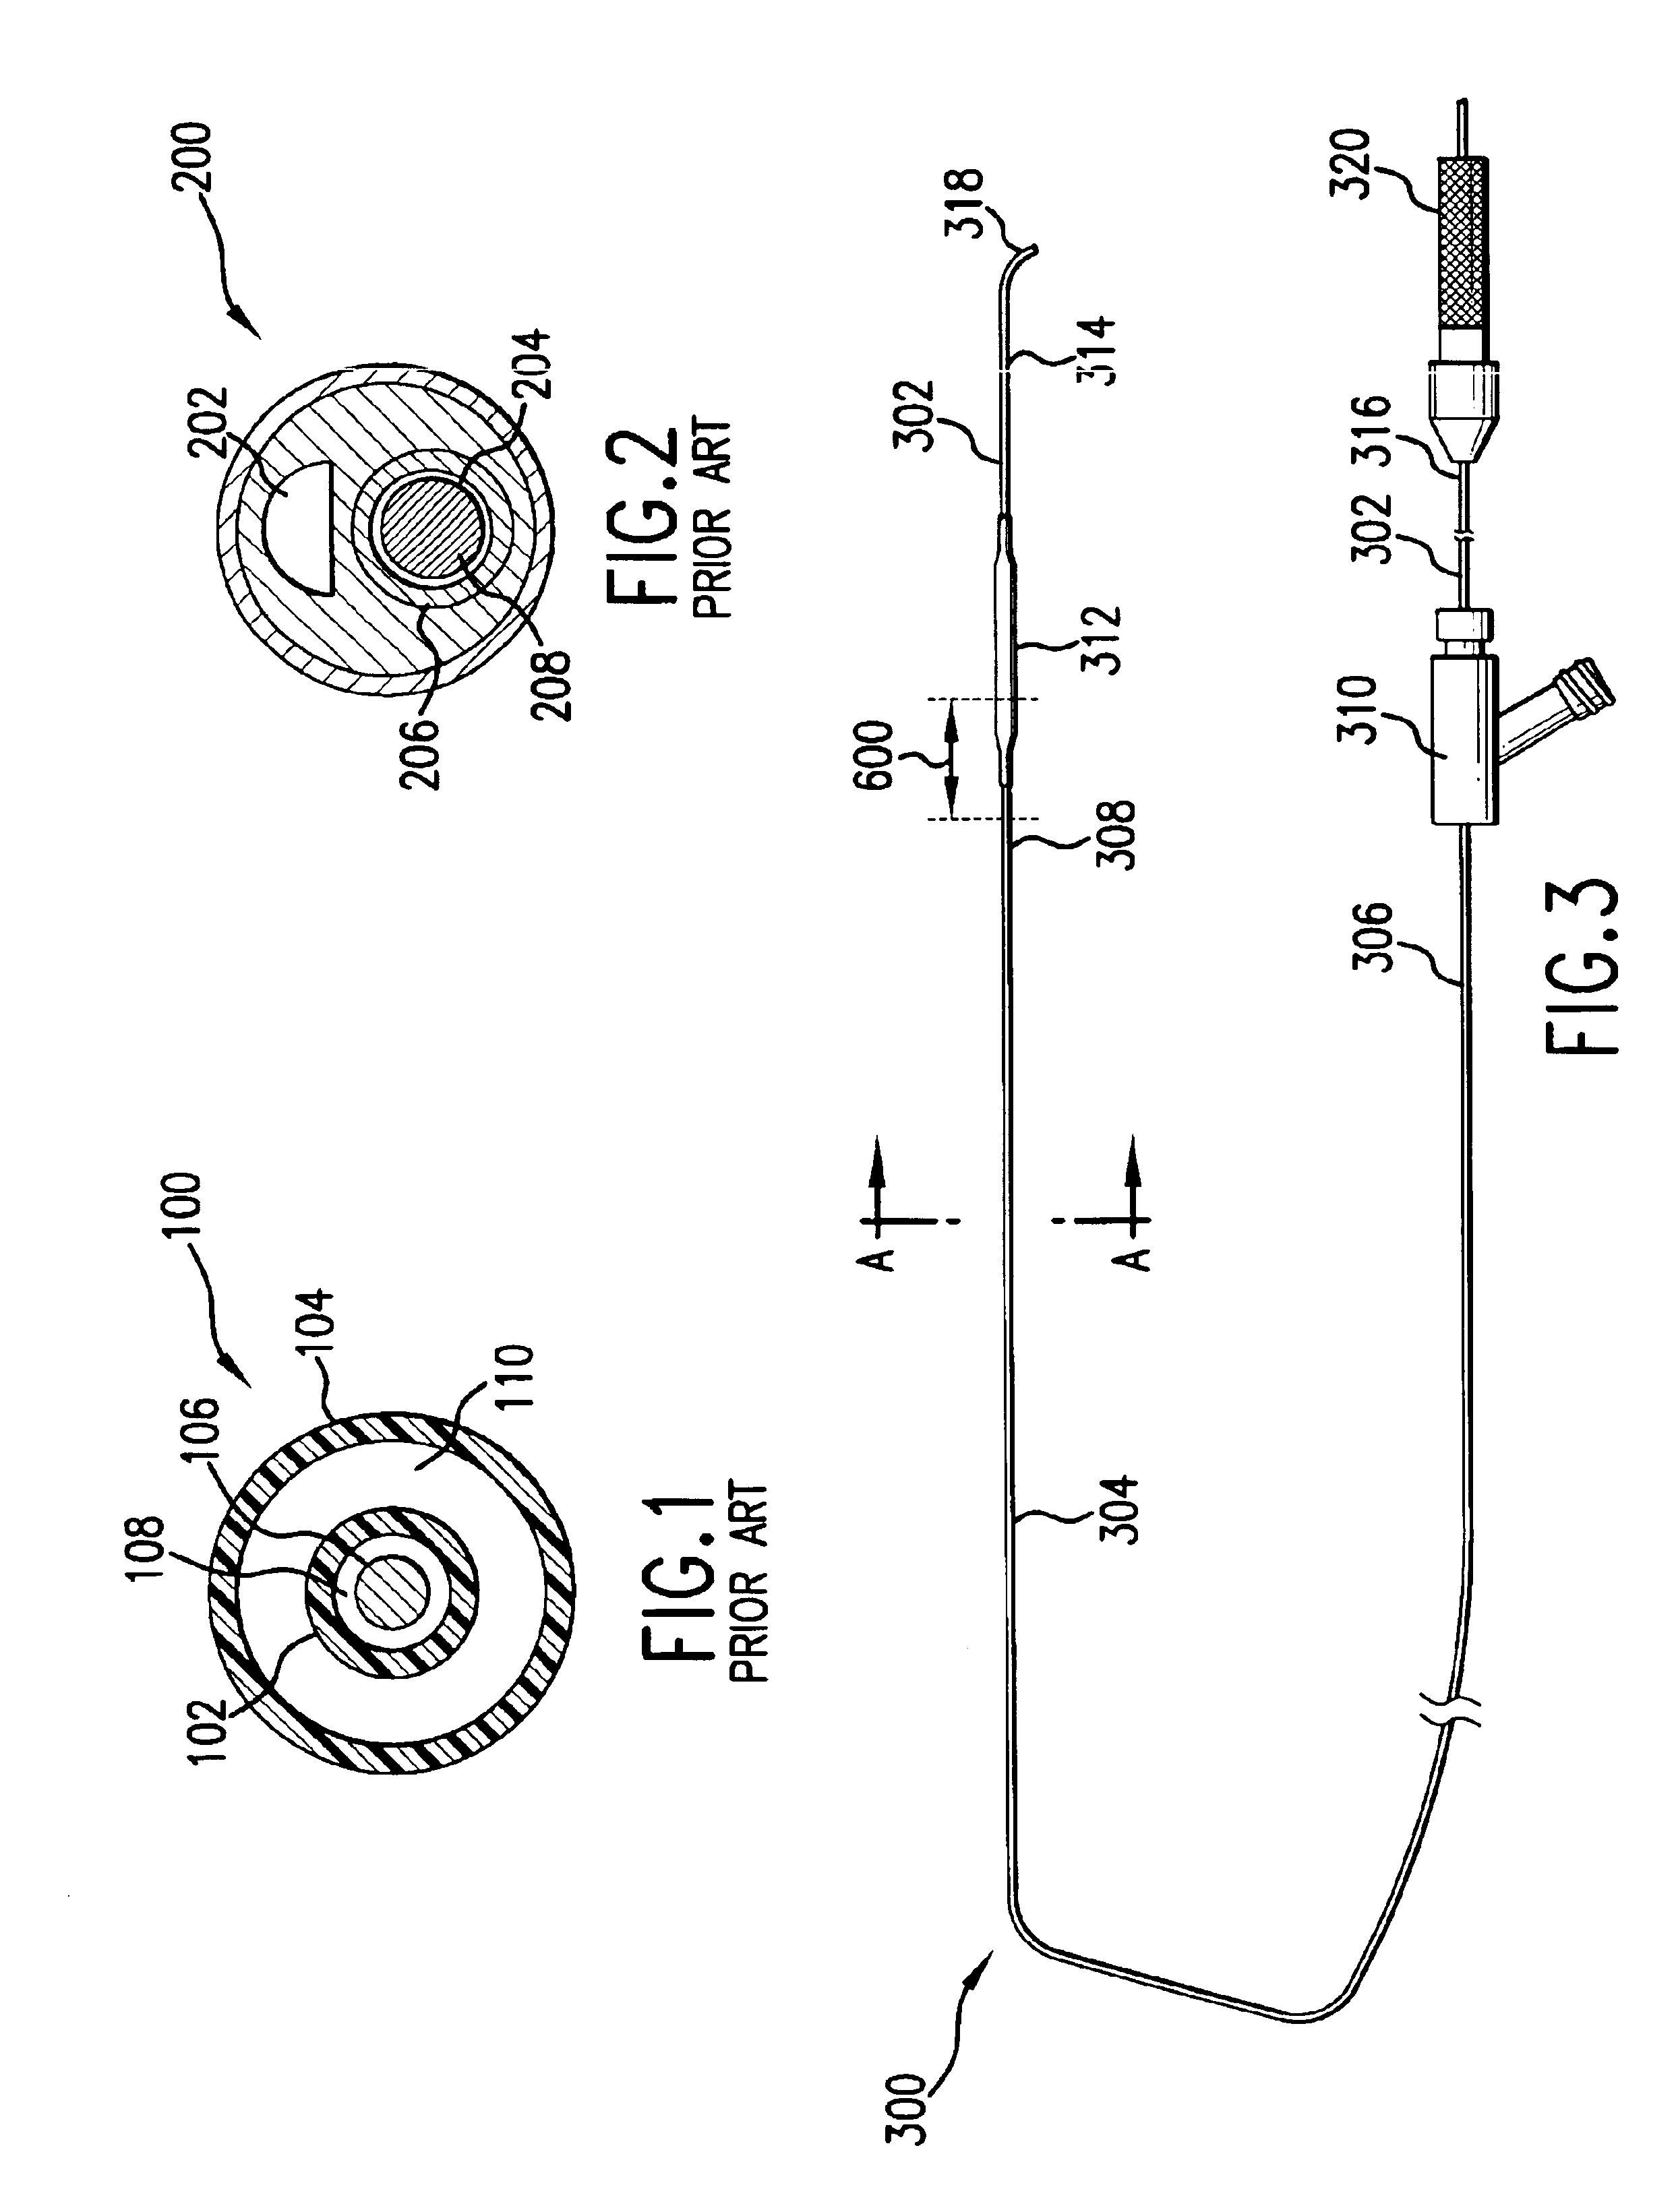 Catheter having a low-friction guidewire lumen and method of manufacture